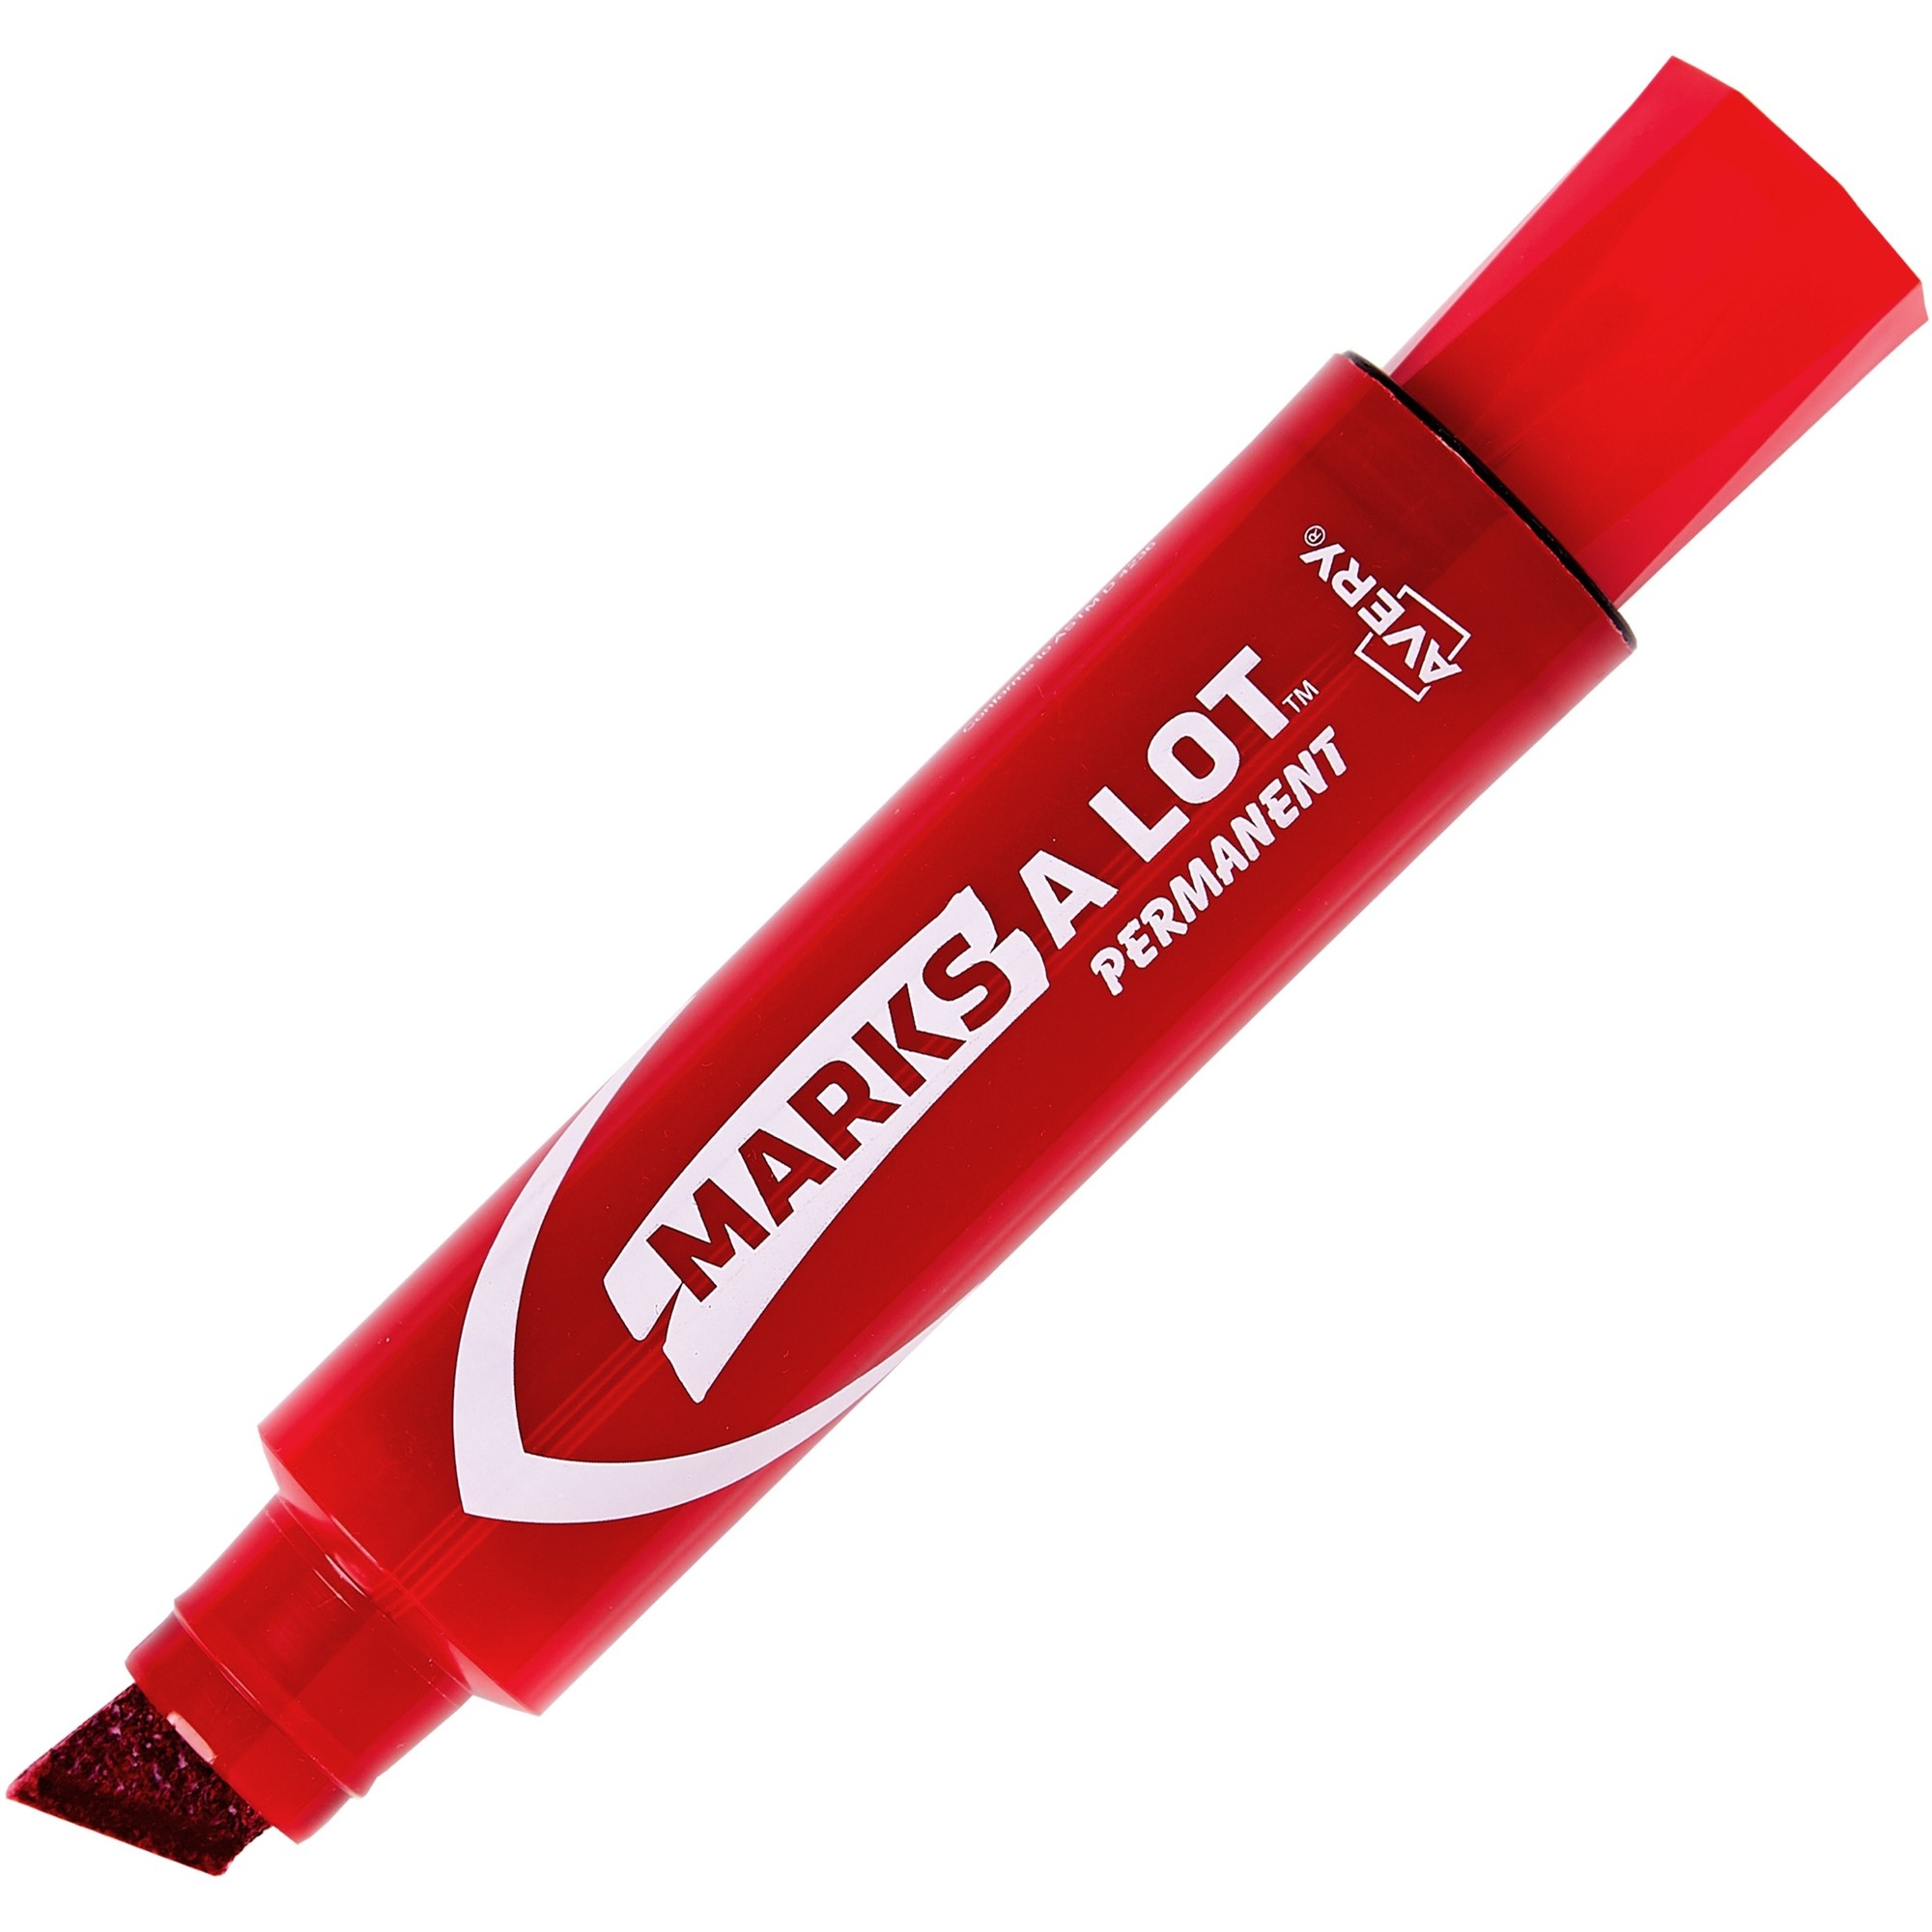 Avery Jumbo Permanent Markers - Chisel Marker Point Style - Red - Red Barrel - 1 Dozen